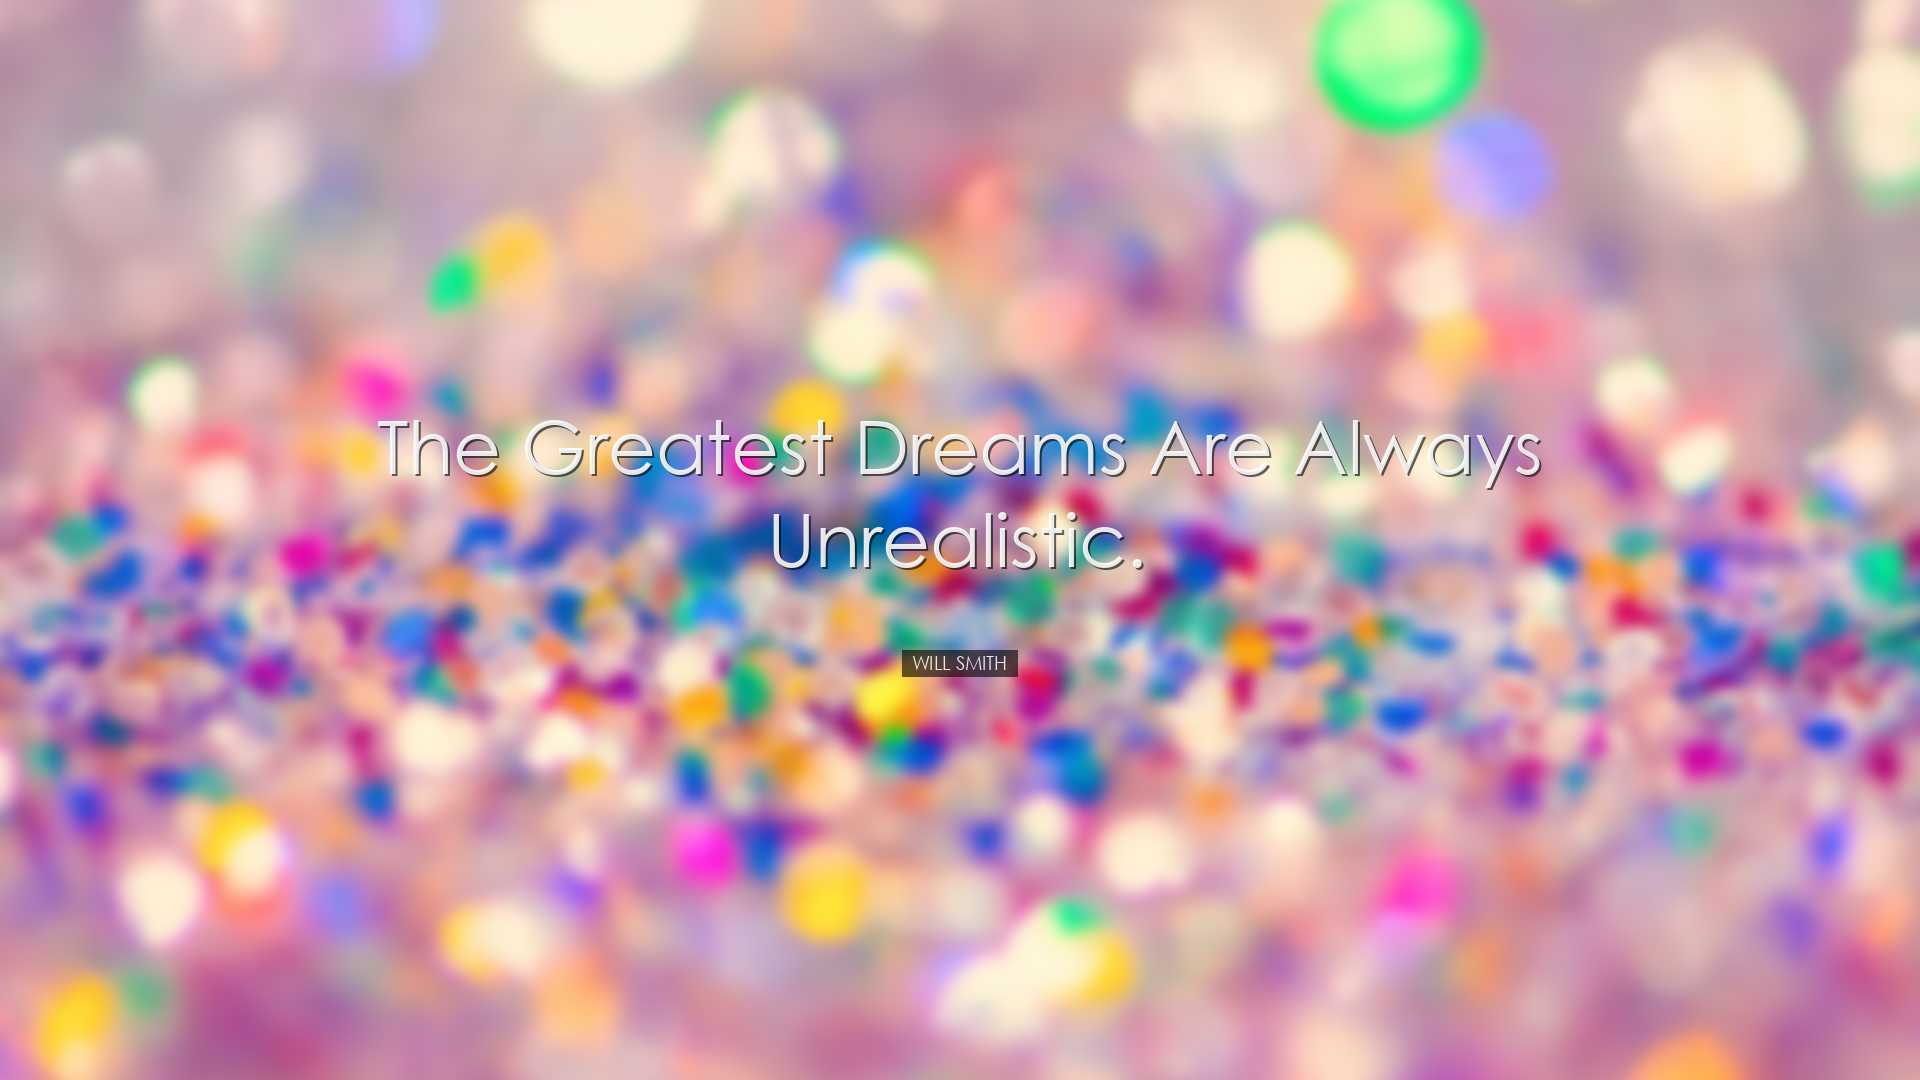 The greatest dreams are always unrealistic. - Will Smith